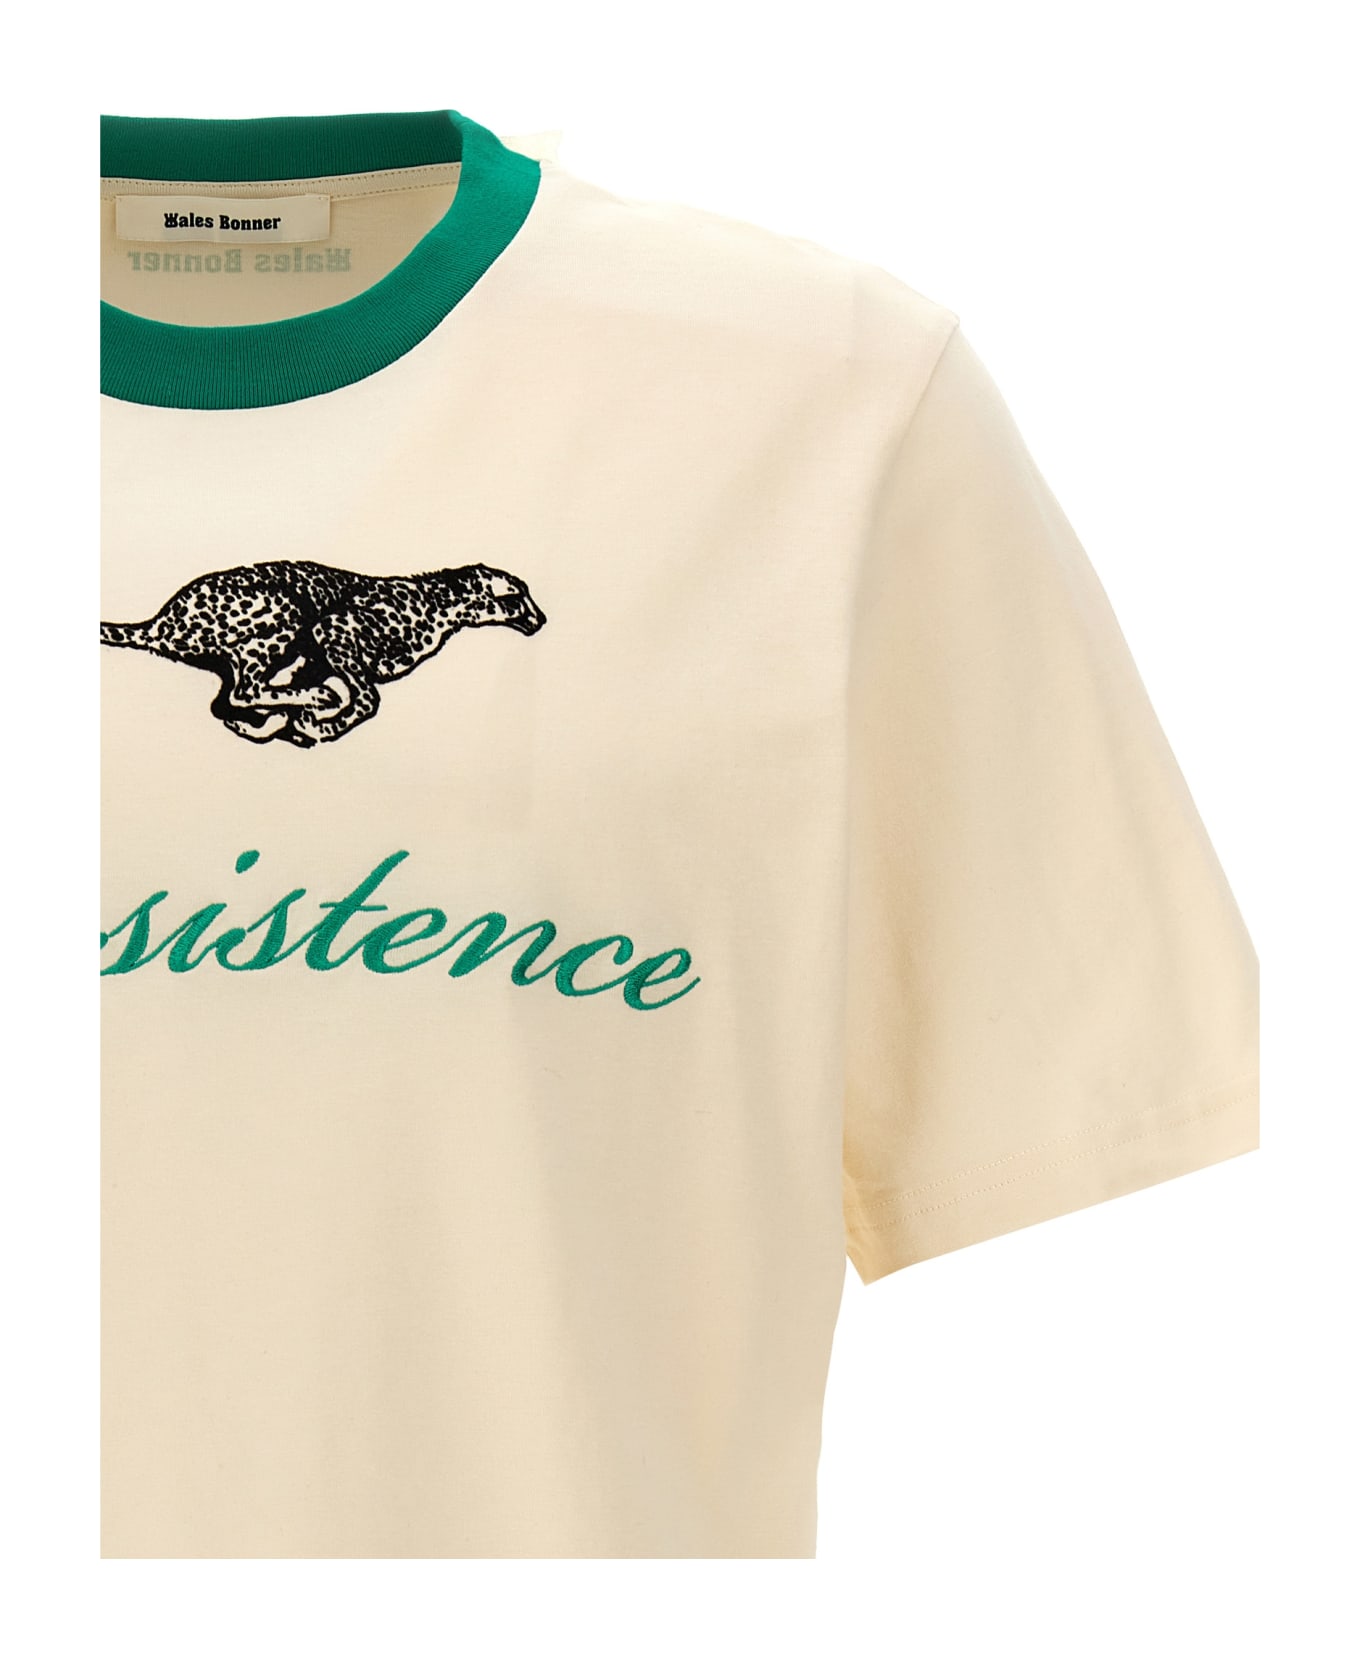 Wales Bonner 'resilience' T-shirt - White